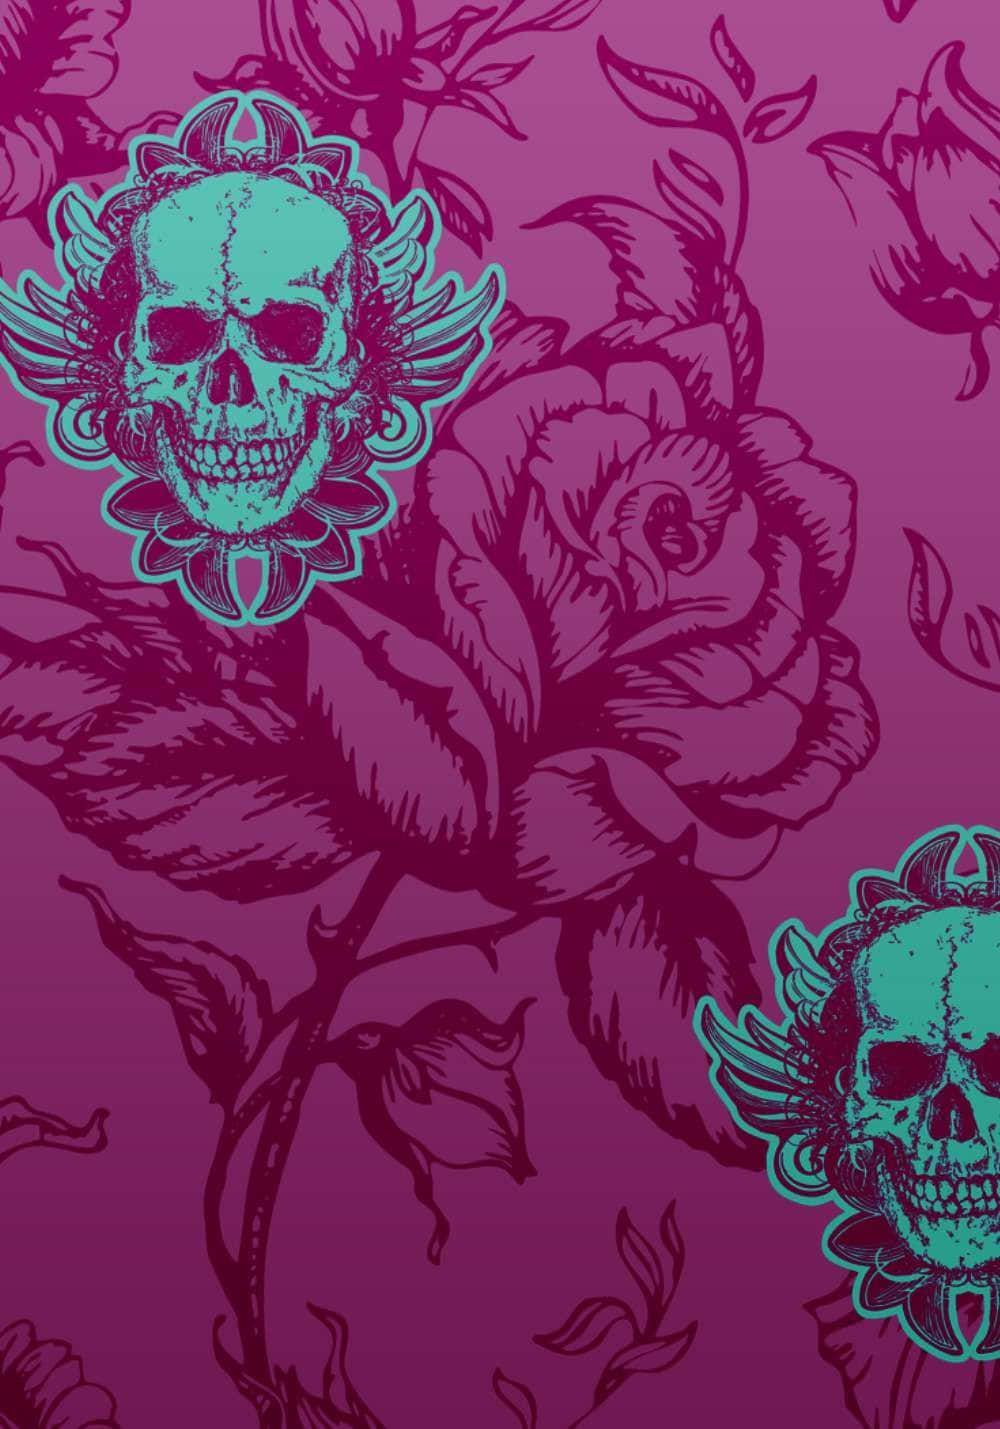 "Celebrate individuality with the captivating Pink Skull" Wallpaper